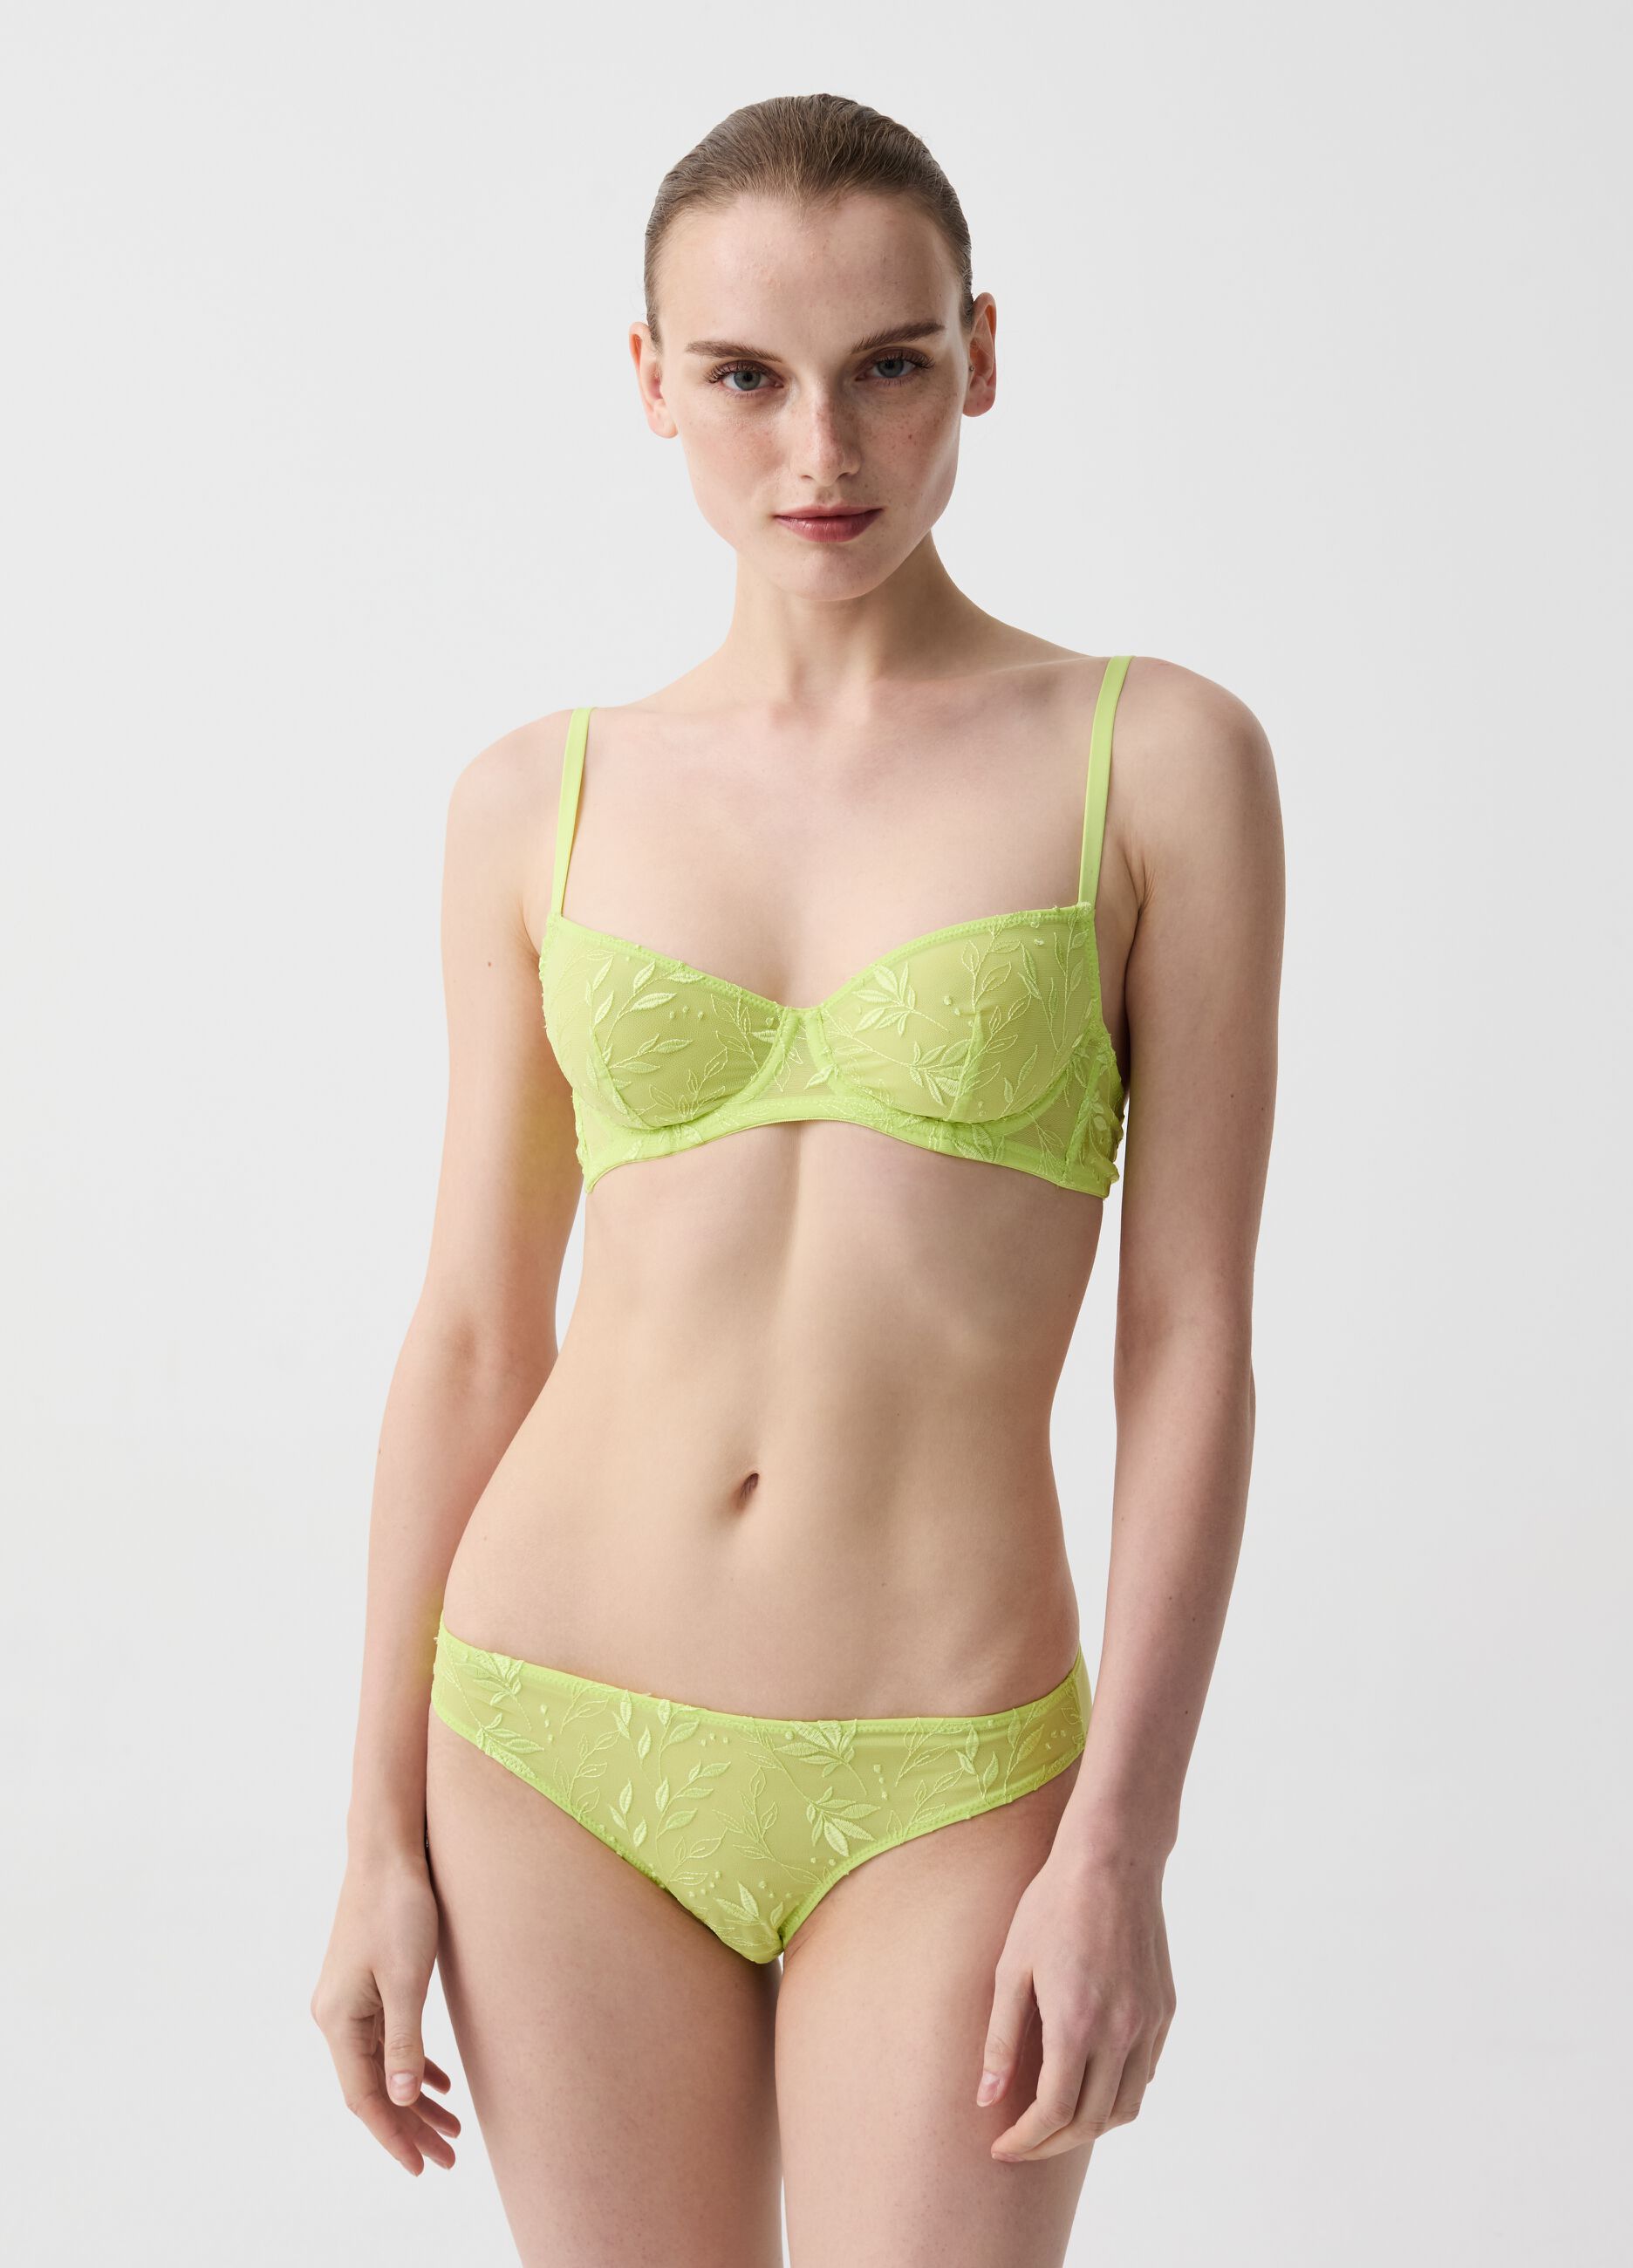 Balconette bra with foliage embroidery